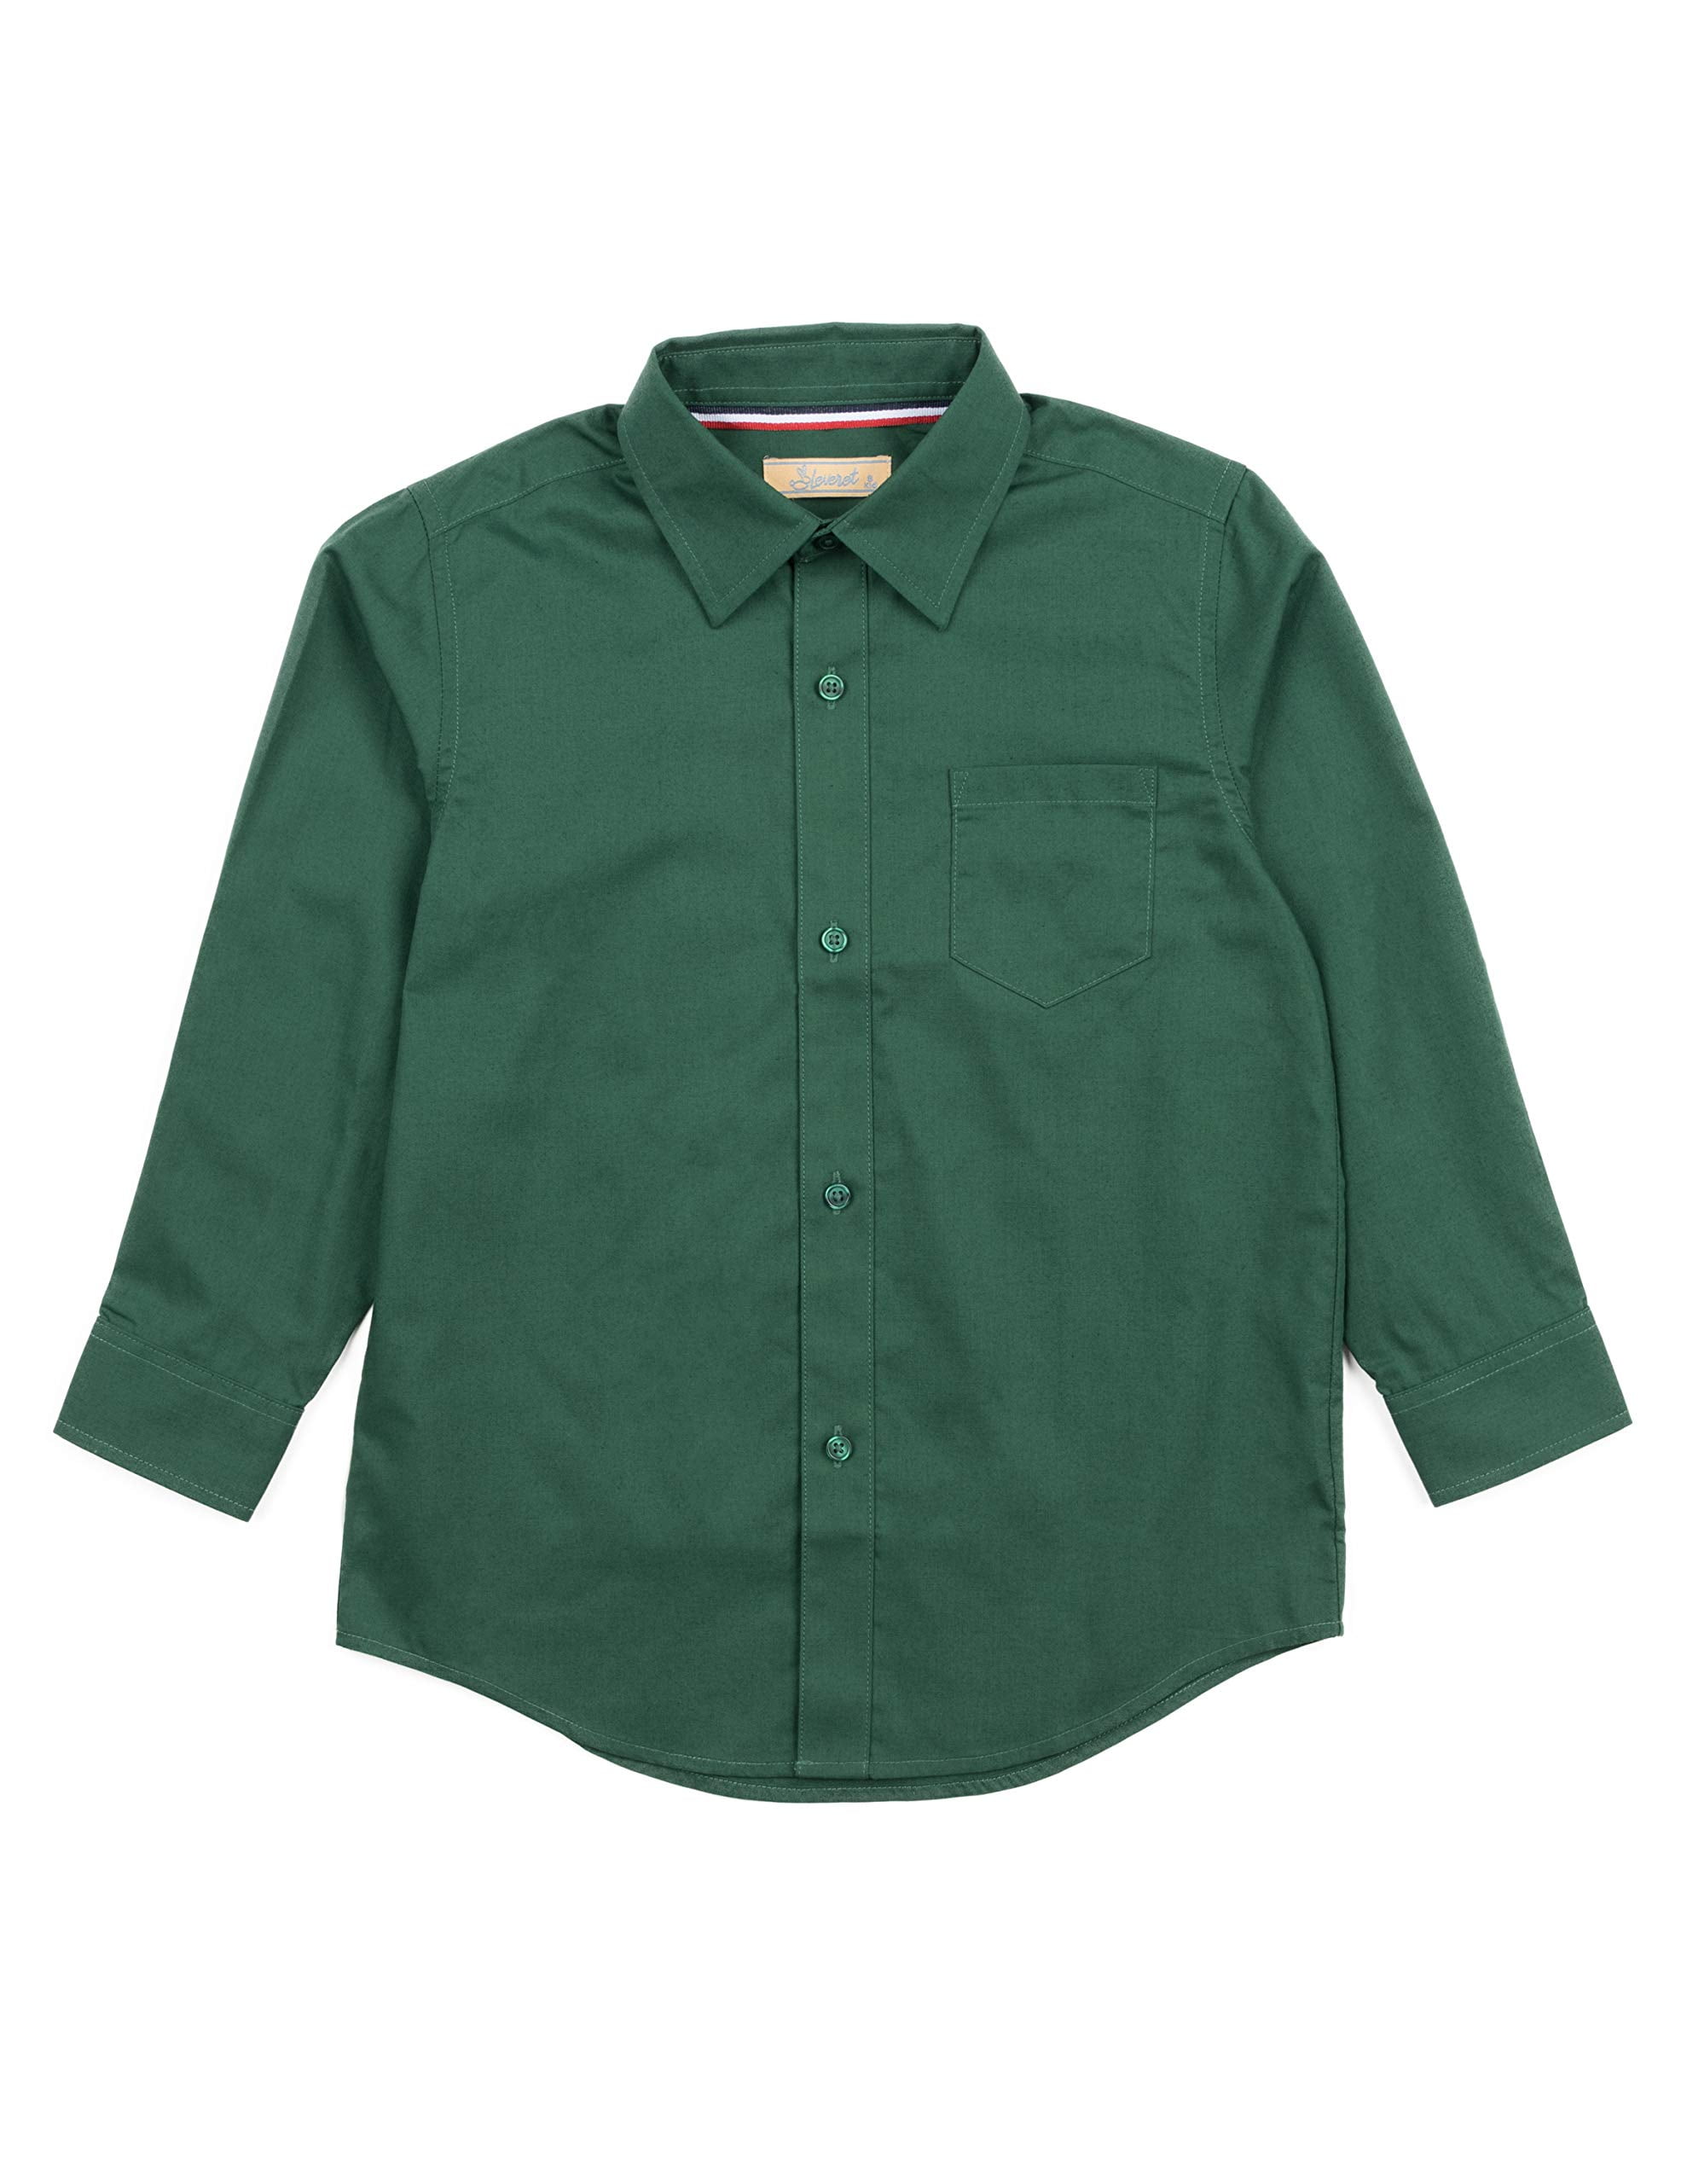 Matching Shirts for Dad and Son (46M x 13-14 Years, Pista Green) :  Amazon.in: Clothing & Accessories